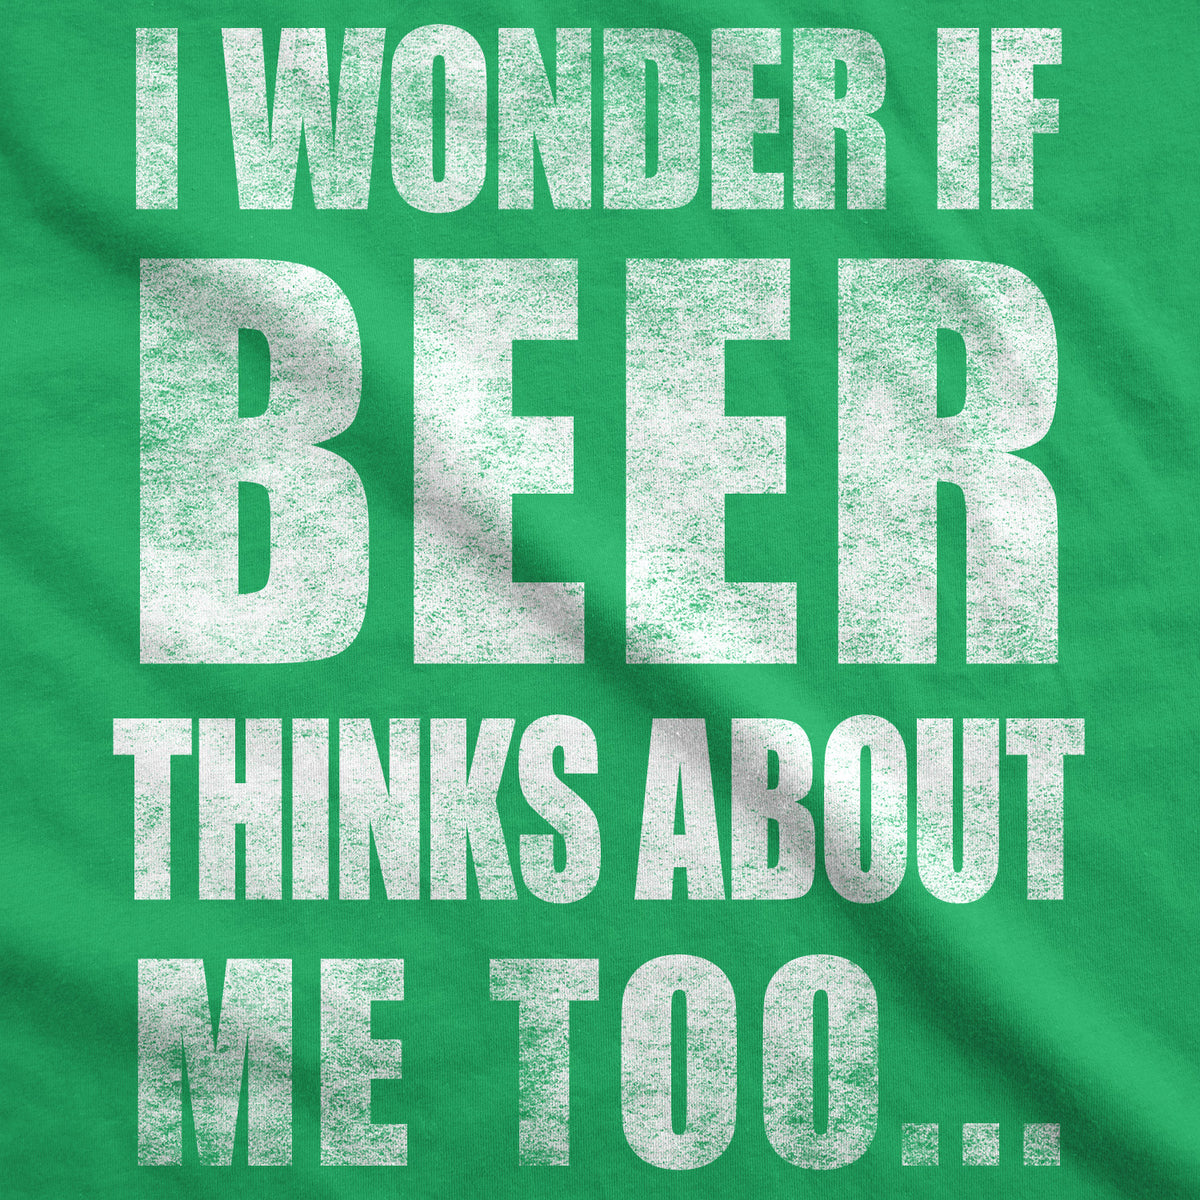 Wonder if Beer Thinks About Me Men&#39;s T Shirt